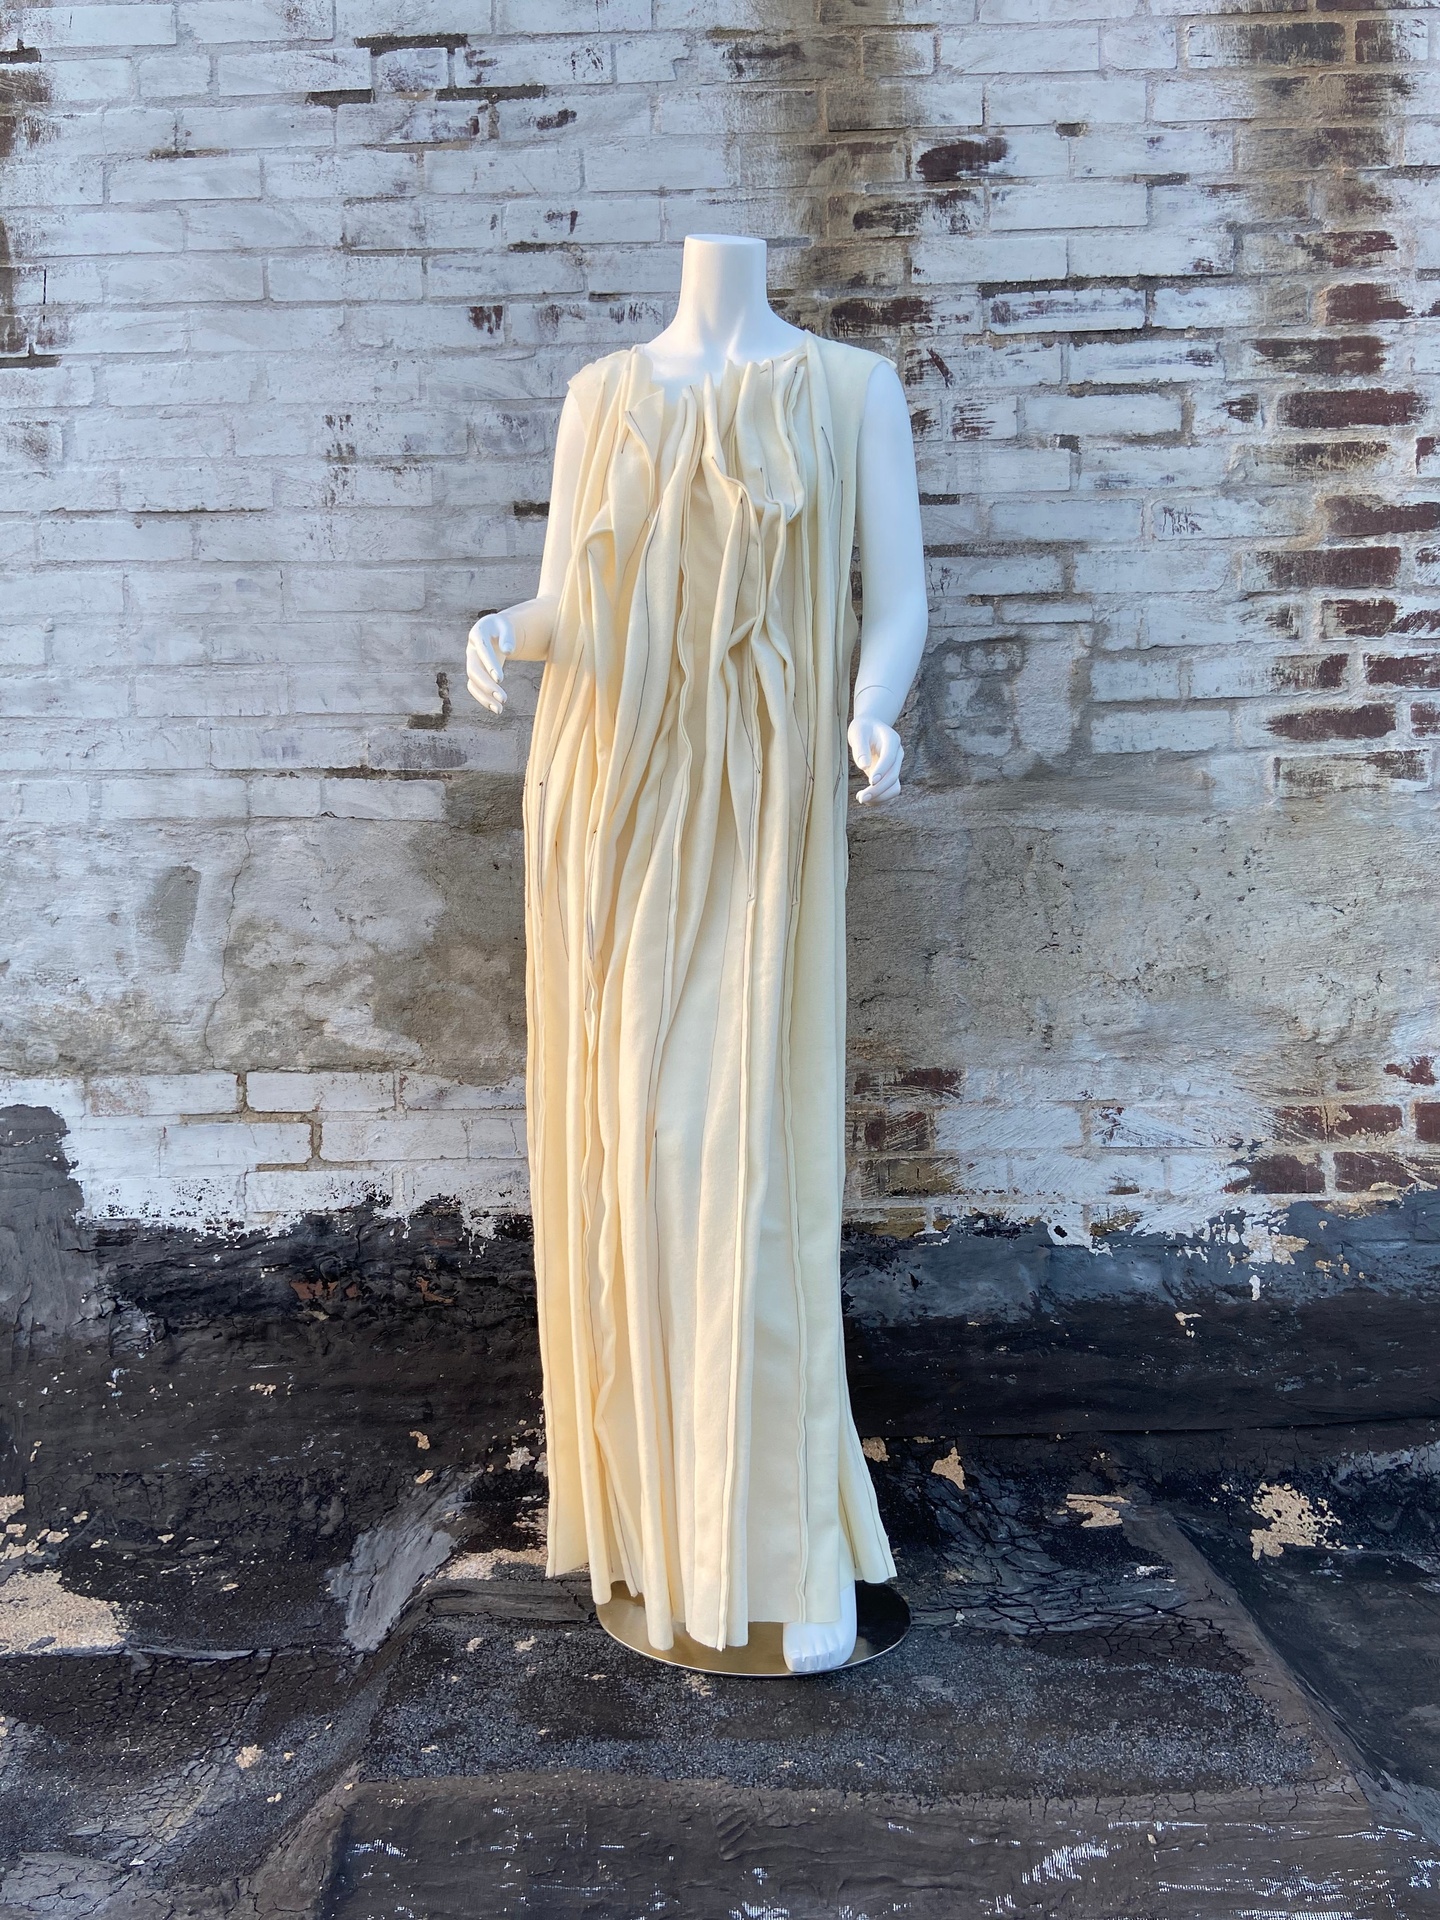 Mannequin wears a floor-length shift dress made of a heavy off-white fabric, constructed with many vertically-running wrinkles and ridges. Mannequin is posed against a dirty whitewashed brick wall.